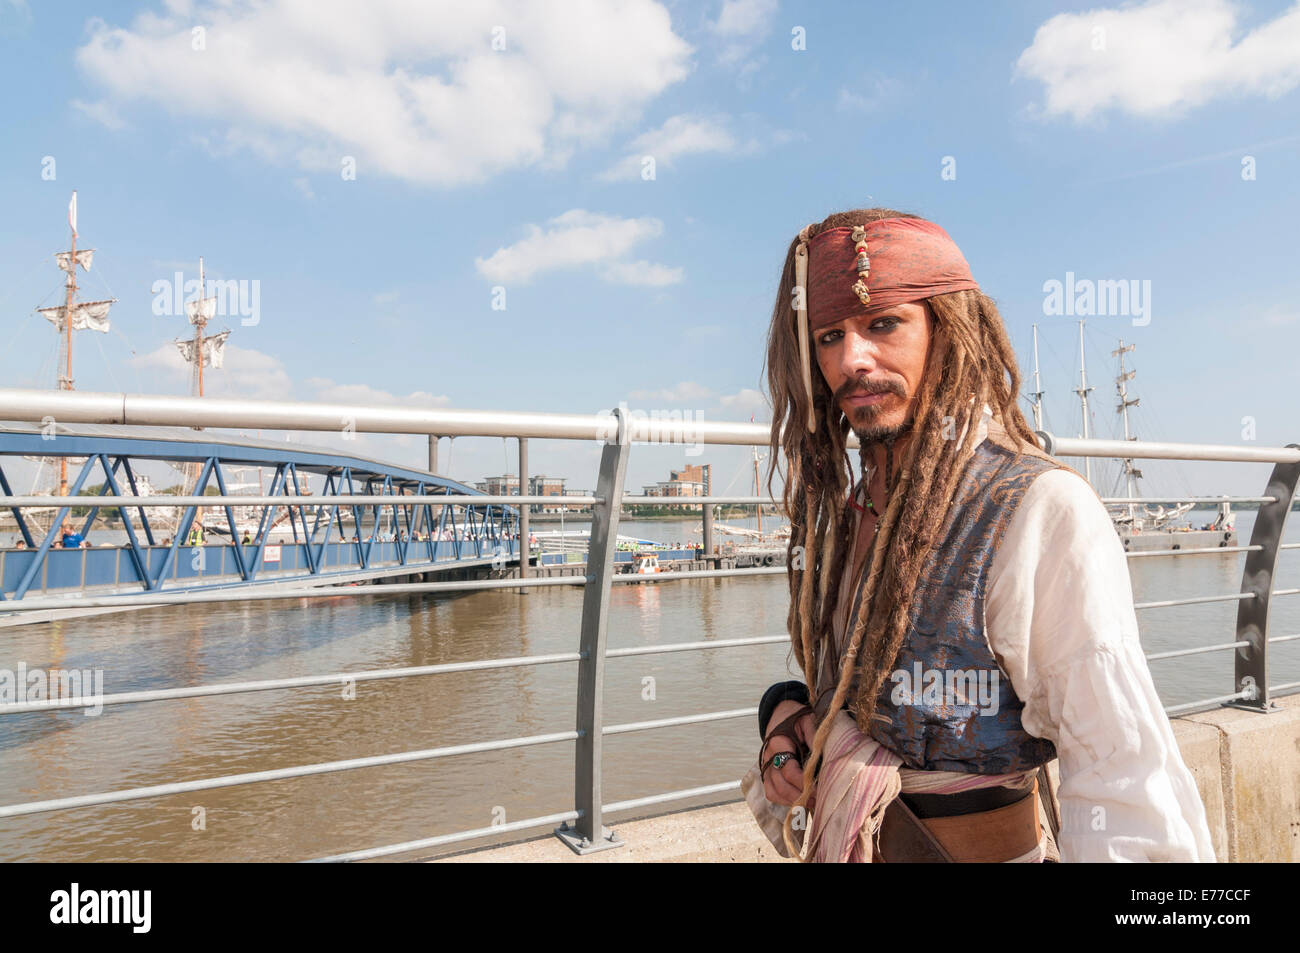 Woolwich, London, UK, 8 September 2014. As part of the month long Totally Thames event, The Royal Greenwich Tall Ships Festival celebrates the largest fleet of tall ships to visit London in 25 years.  Pictured: a Johnny Depp lookalike dressed as Captain Jack Sparrow from the movie 'Pirates of the Caribbean', poses for visitors waiting to board the tall ships. Credit:  Stephen Chung/Alamy Live News Stock Photo